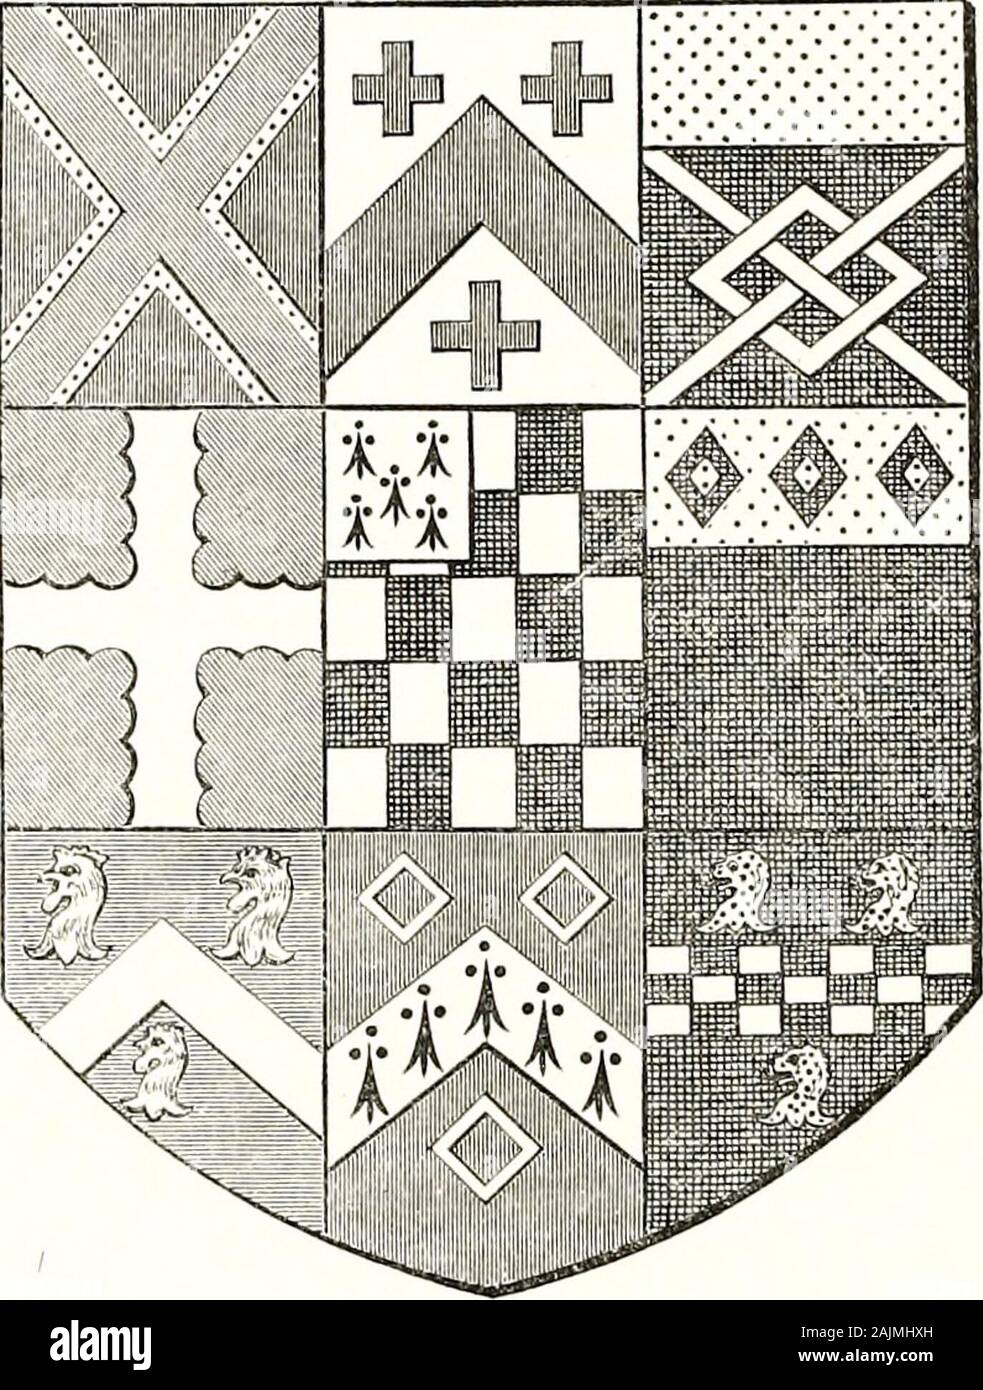 The Birkbecks of Westmorland and their descendants . t manerium de Charwelton a° 30 Edw. IV. The arms allowed for this lady in the scheme of quarterings at thebase of the pedigree are :— Sable, a fess chequey argent and of the ist,between 3 Lions heads erased or (vide cut, p. 6). In Augustine Vincents MS., College of Arms, vol. xliv., fo. 68, thearms given to the above Katherina Berbeck are, Sable, on a chief or threeniascles of the first, but this would appear to have been a mistake.Apparently therefore there had been an earlier grant of arms before 1515,the son having bought the Manor of Cha Stock Photo